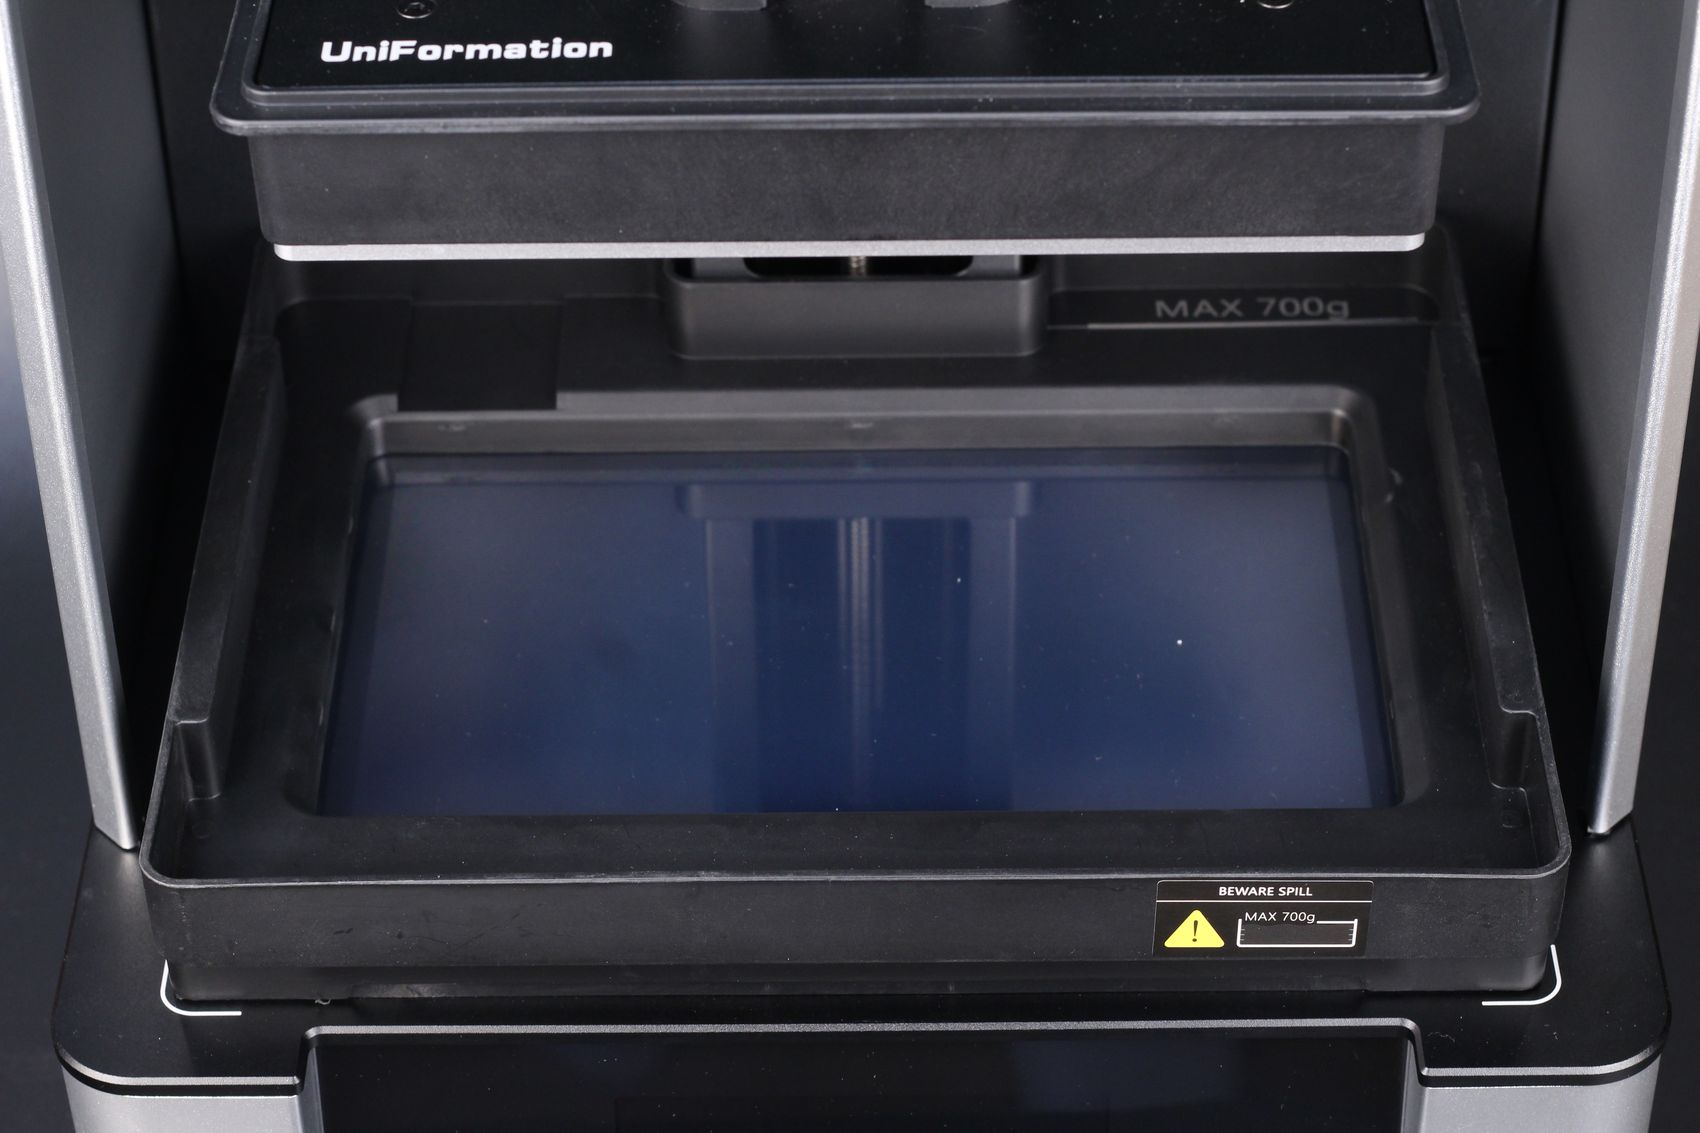 GKTWO Resin VAT1 | UniFormation GKTWO Review: With W230 and D265 Post Processing Kit